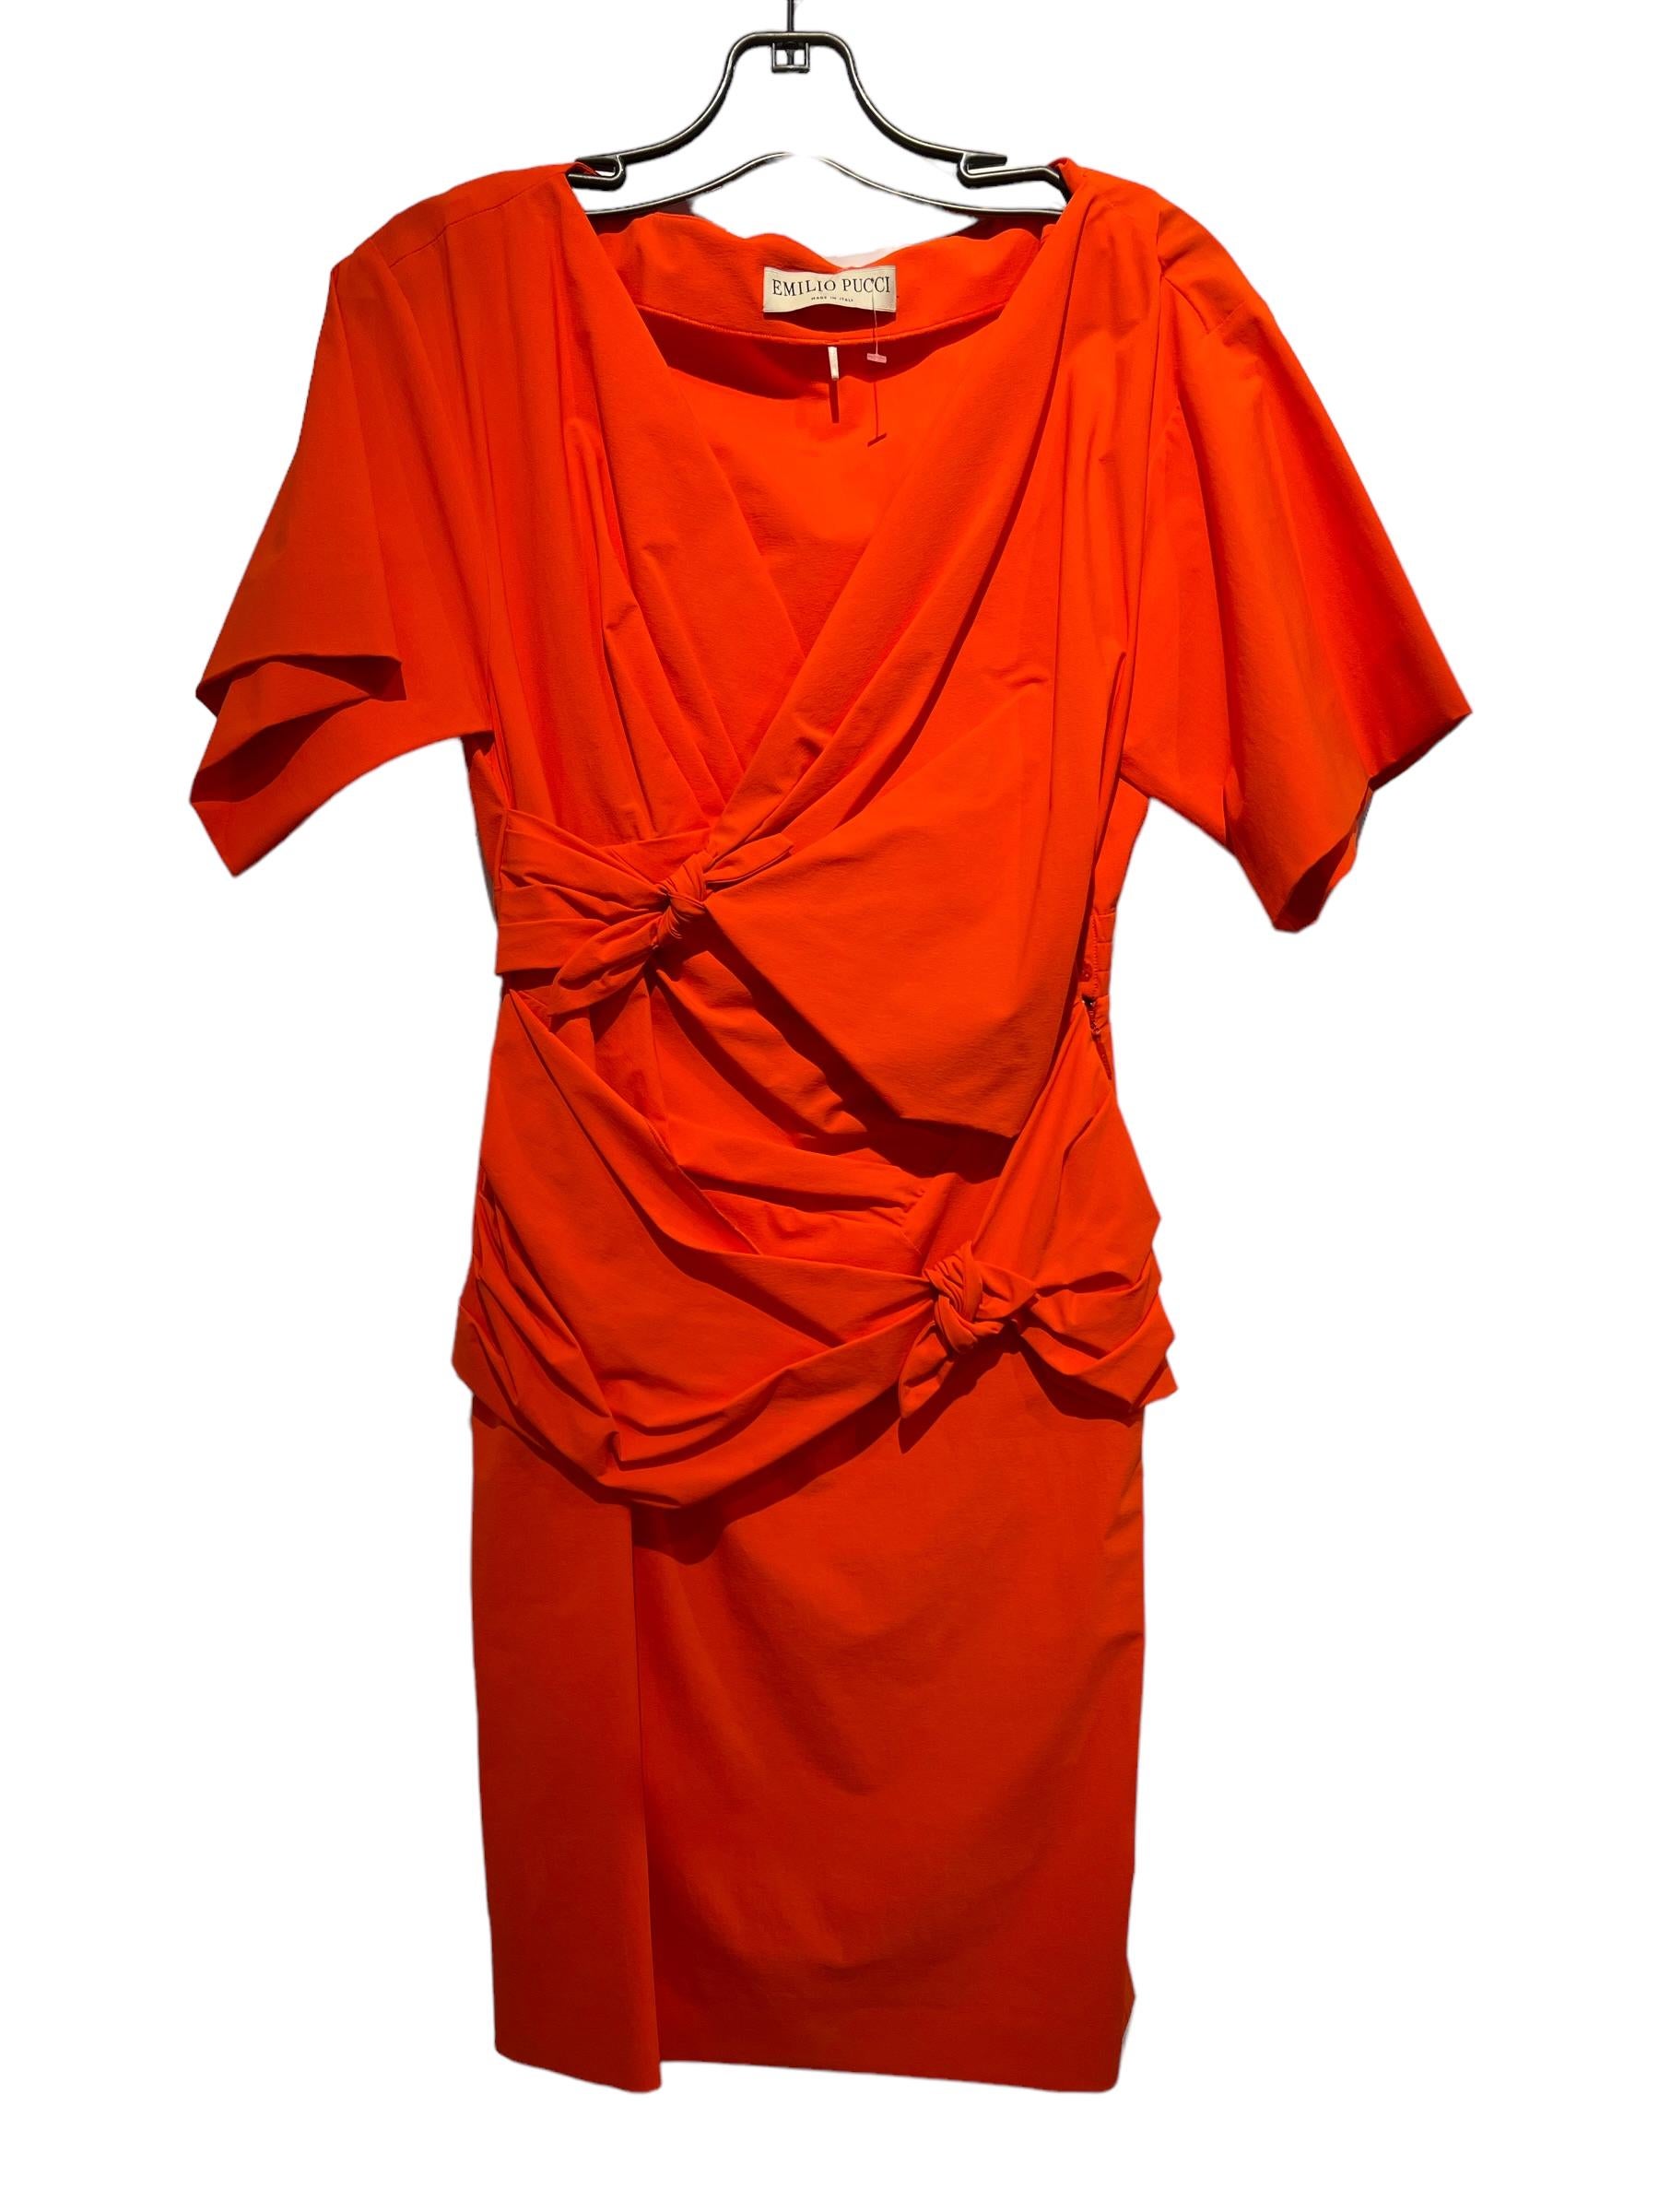 Emilio Pucci Shift Orange Dress, Pleated Accents, Short Sleeve with V-Neck, Concealed Closure at side. 